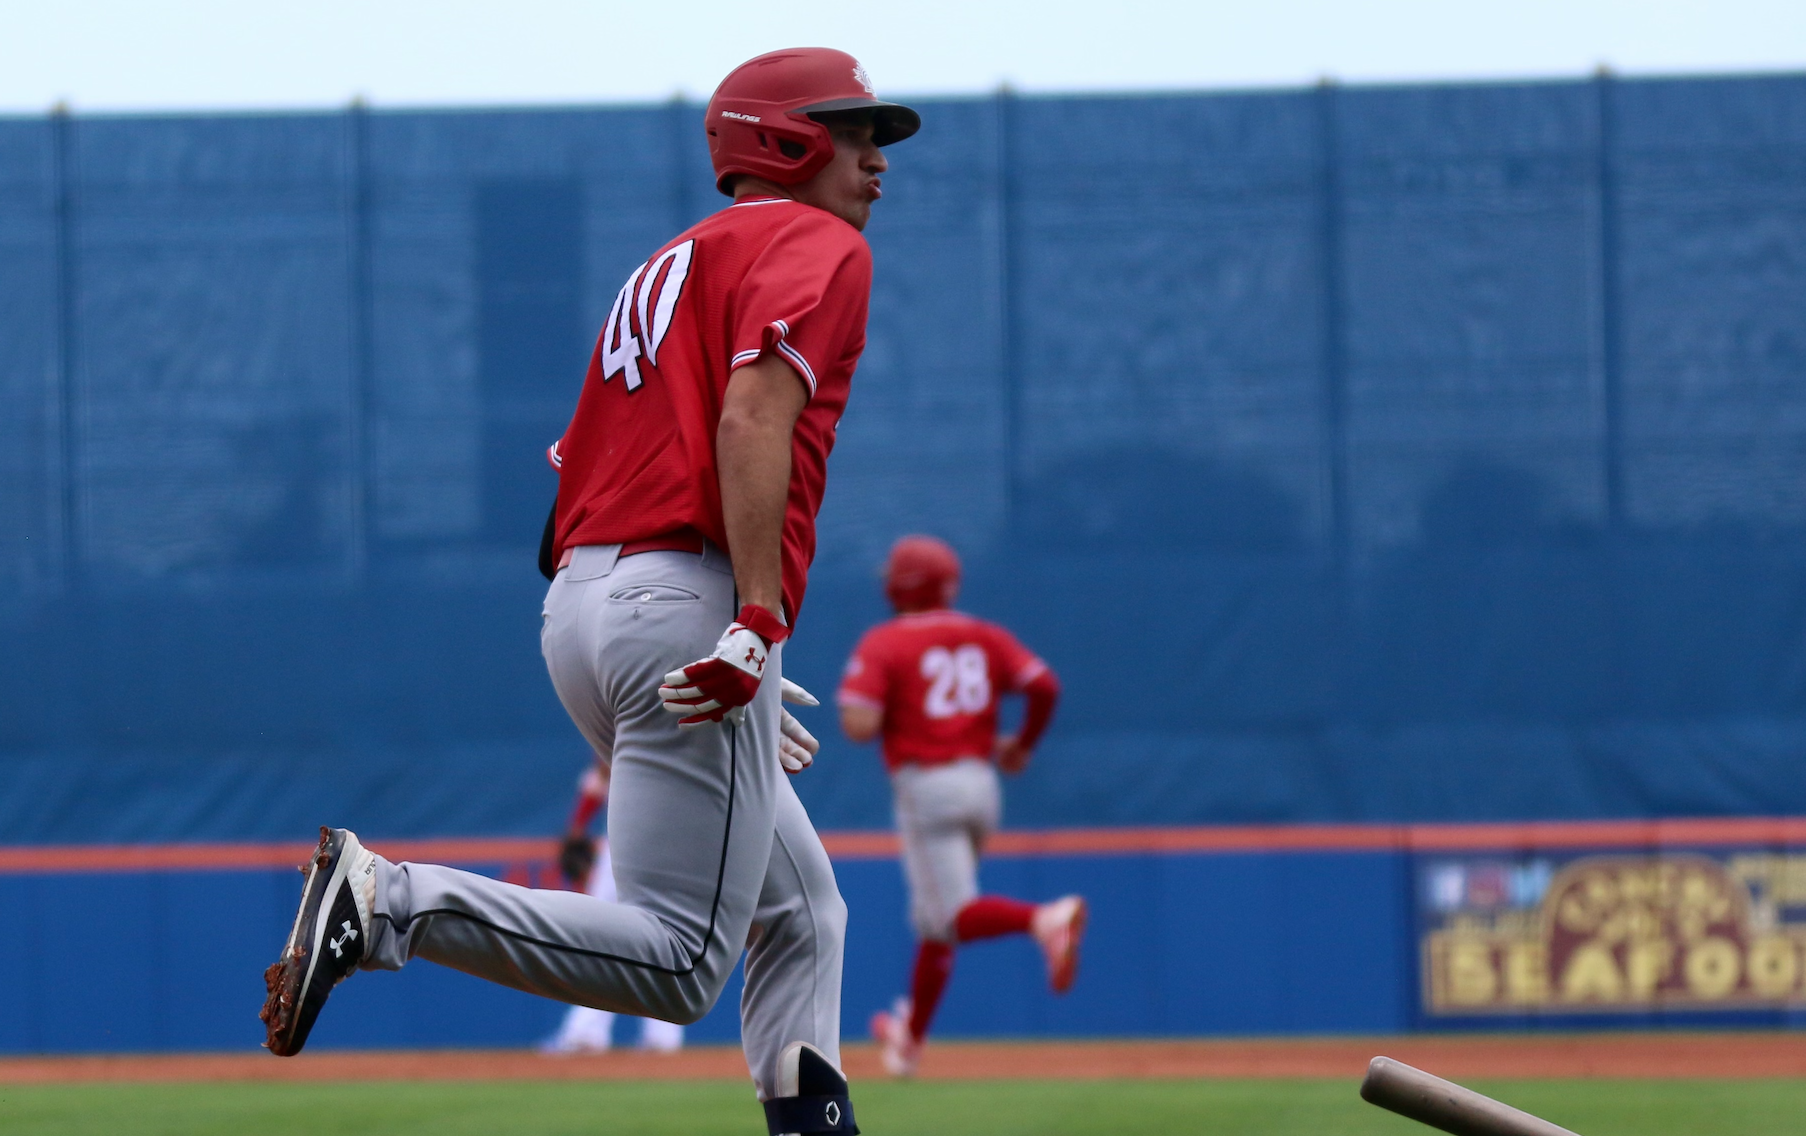 Americas Olympic Qualifier: Dominican Republic rallies to beat Canada